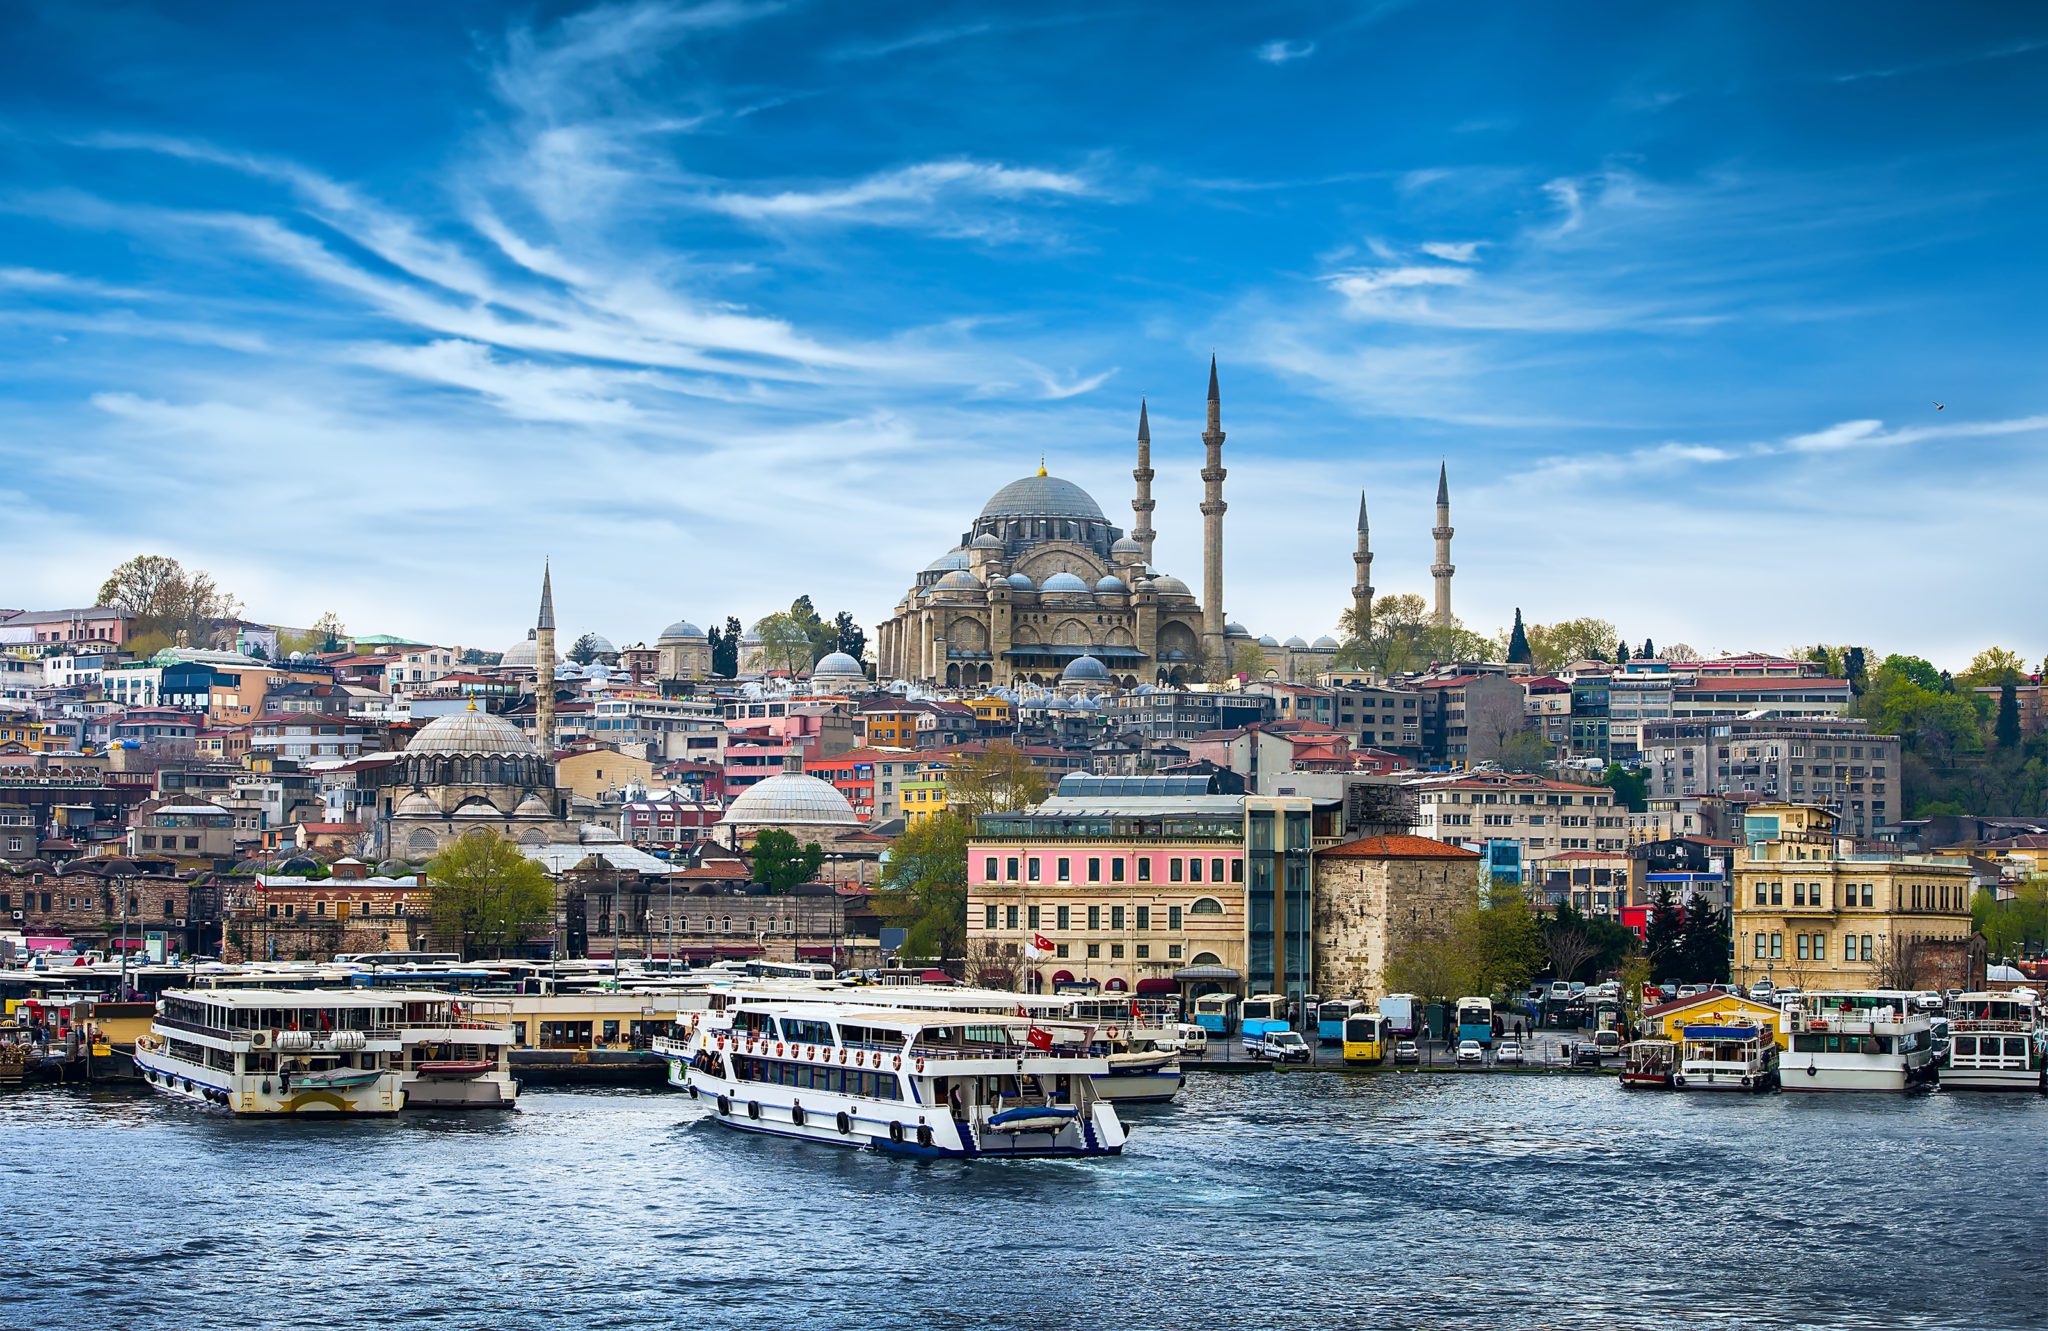 Istanbul is challenging the likes of Munich, Vienna and Zurich as primary business travel hubs, according to travel agency CWT.